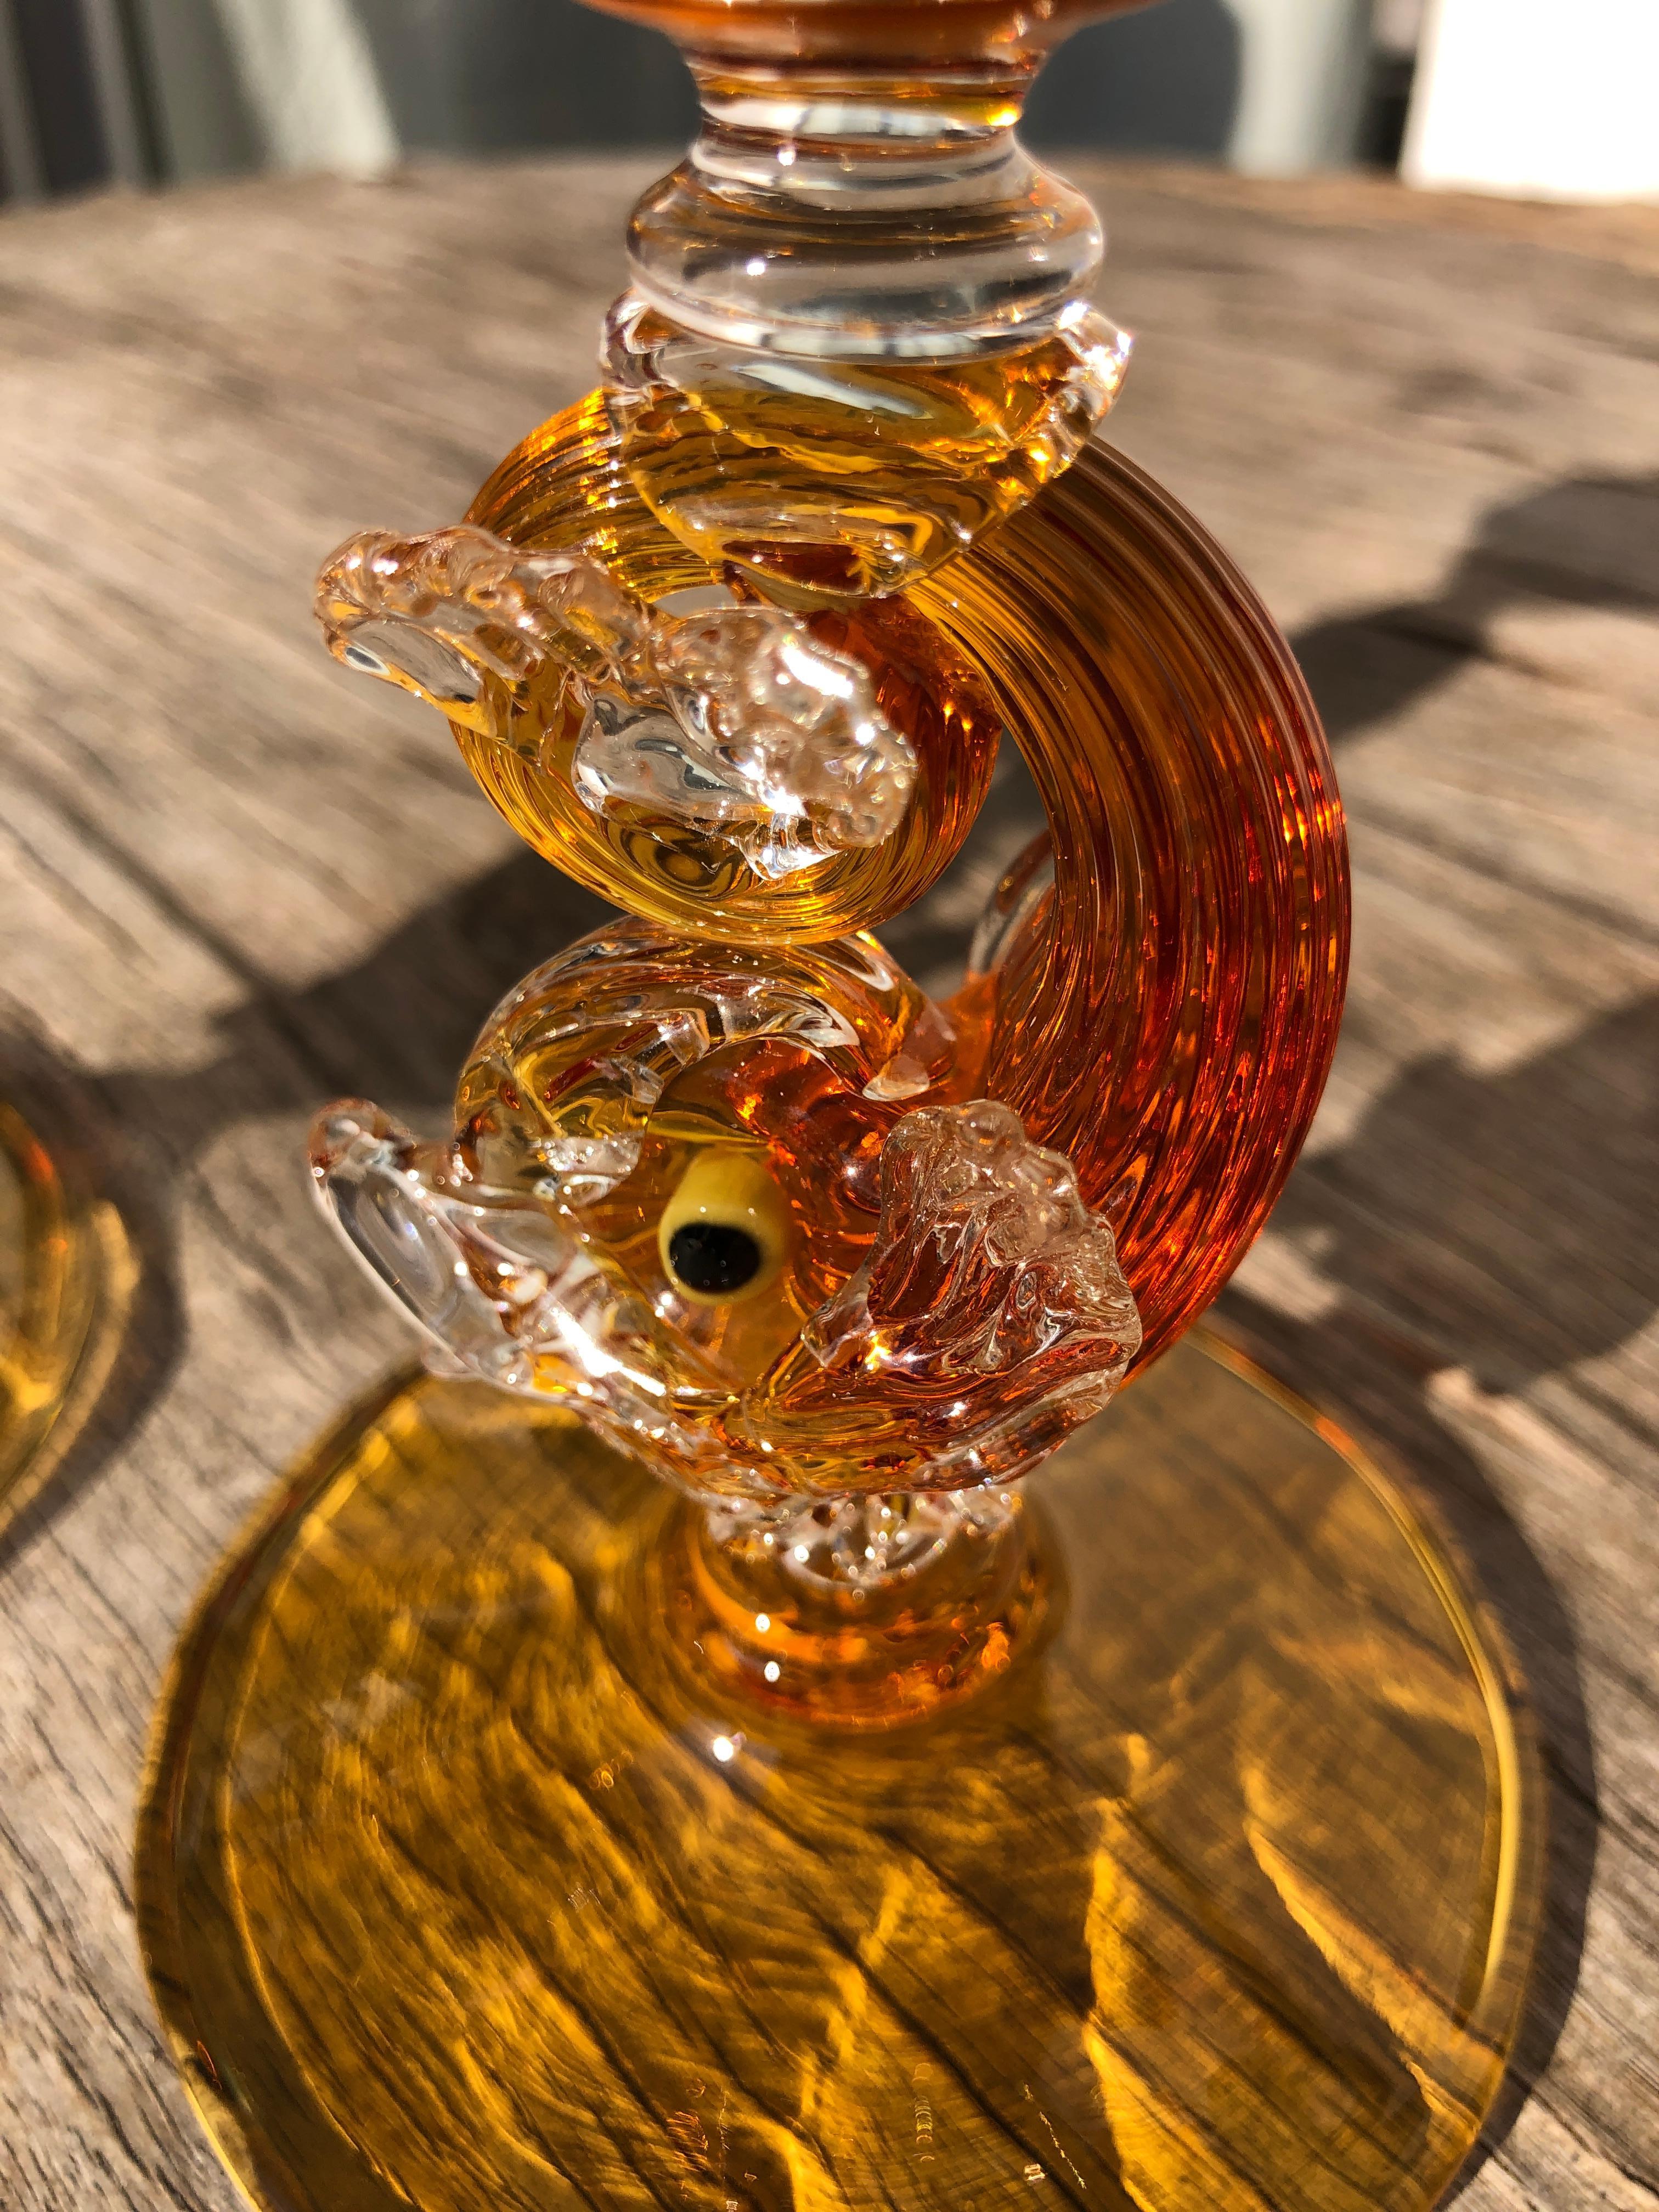 This pair of hand blown candlesticks are made of a very unusual amber color with a charming dolphin connector. Made by the master glassblowing firm of Antonio Salviati, the workmanship speaks for itself. Figural dolphins add just the perfect amount